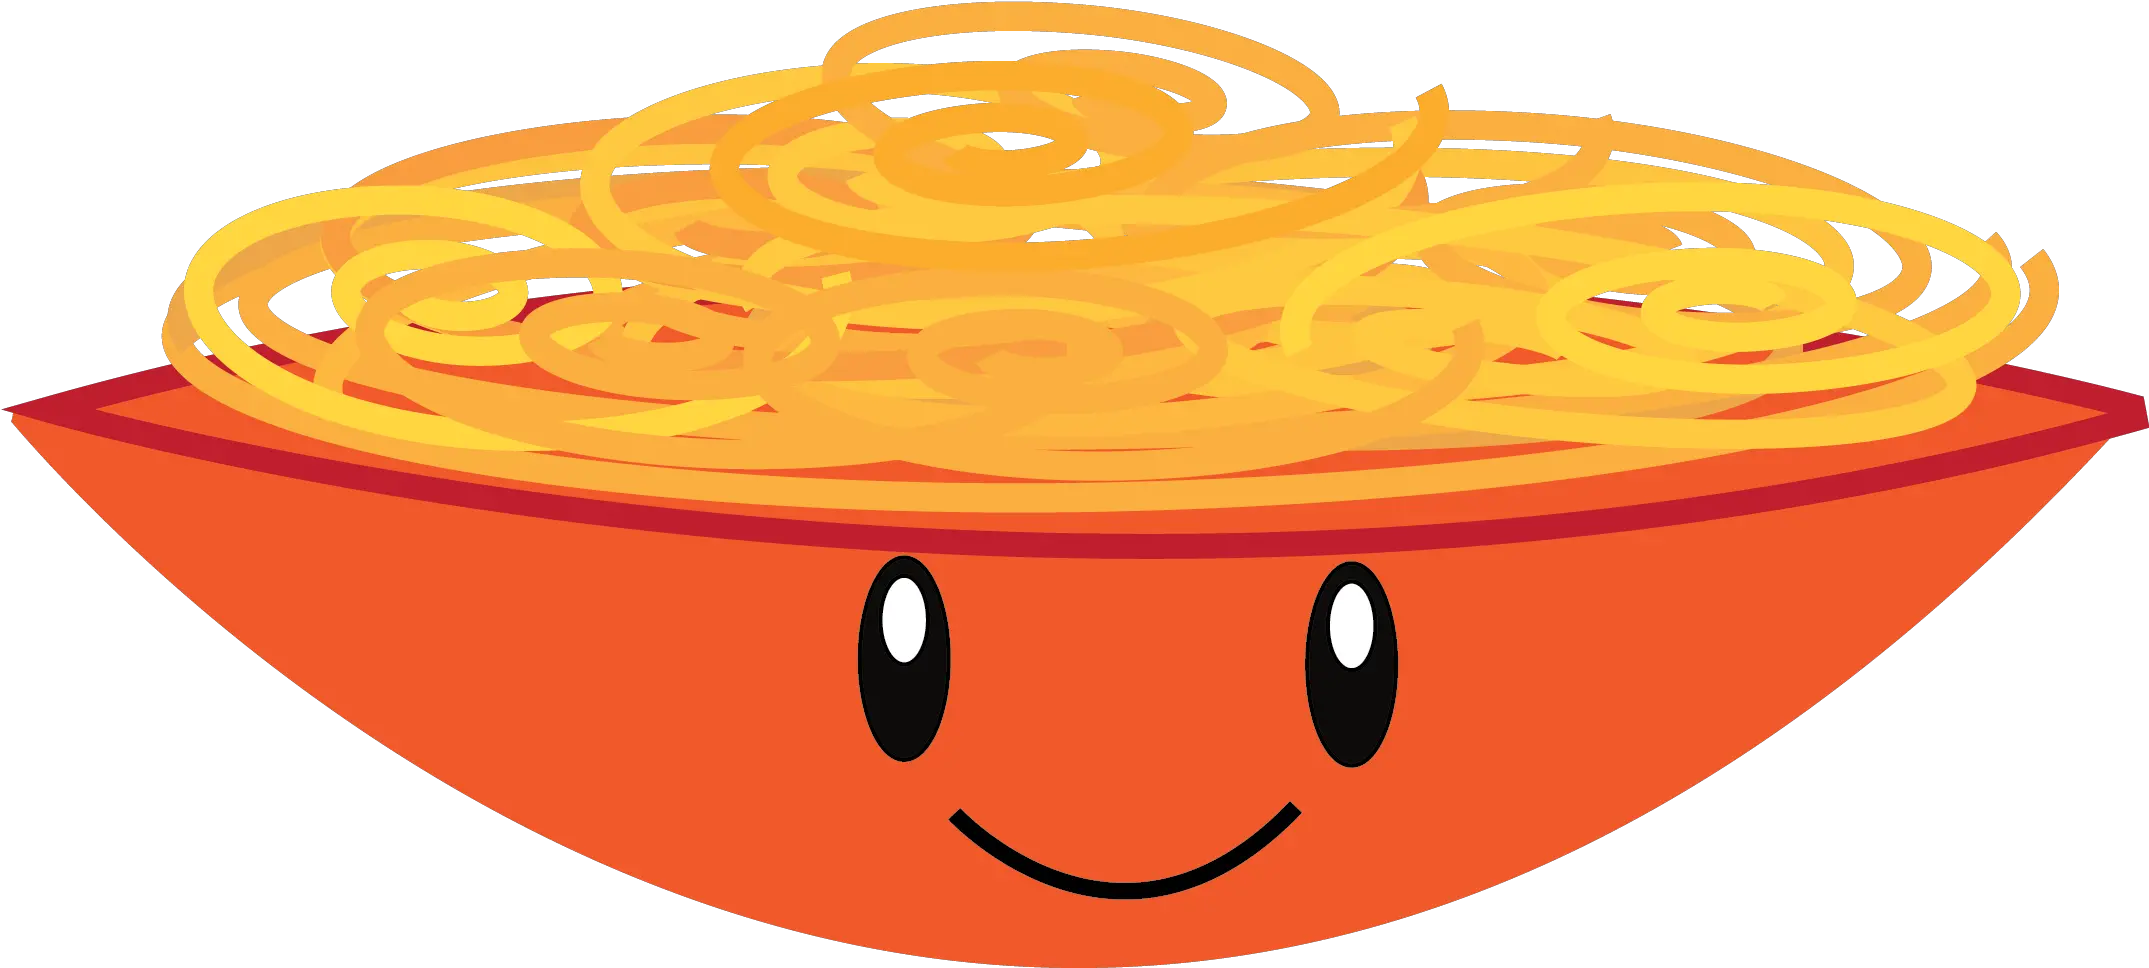 Pasta Download Png All Spaghetti Clipart Smiling Pasta Png